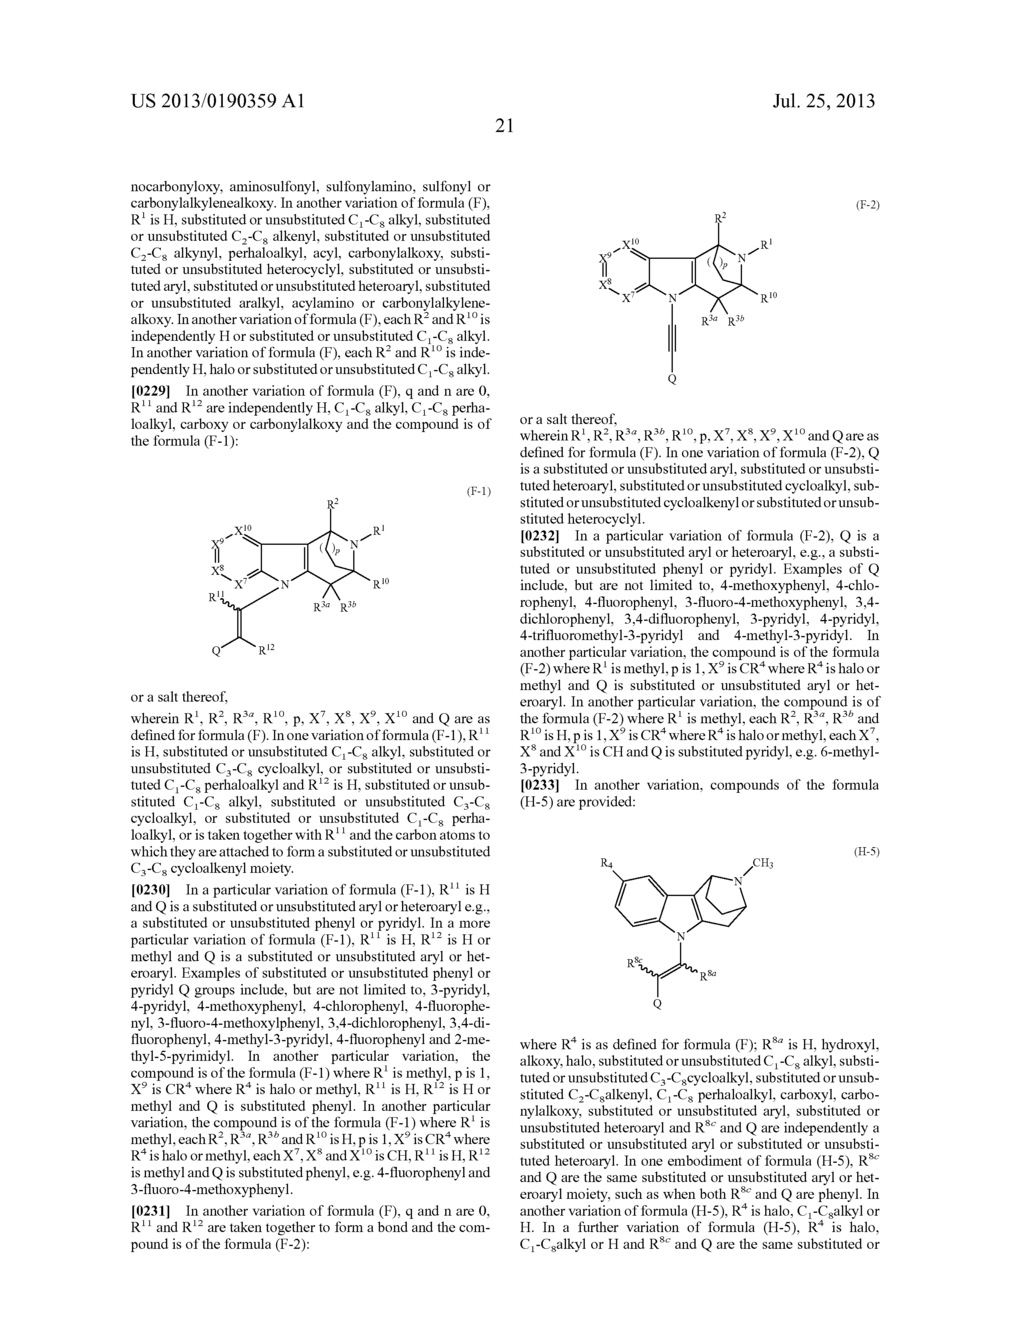 BRIDGED HETEROCYCLIC COMPOUNDS AND METHODS OF USE - diagram, schematic, and image 22